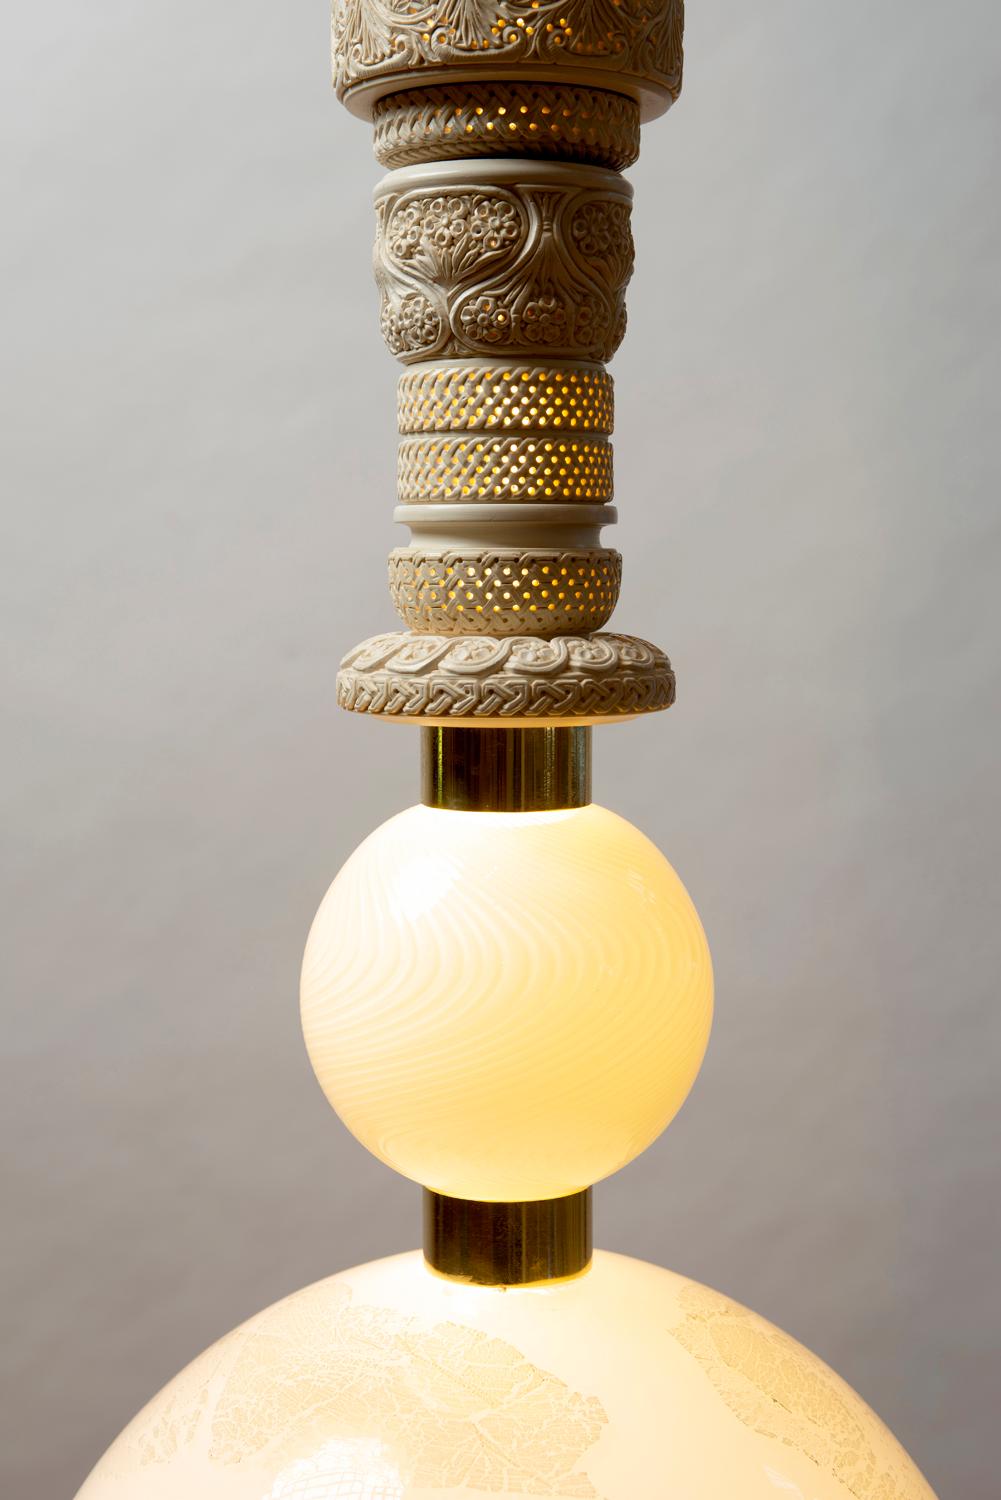 Feyza Kemahlioglu
Pillars of Meerschaum: Evening White, 2018
Meerschaum, blown glass, brass, gold leaf and LEDs
72 x 12 x 12 in
Can be made to order

Feyza Kemahlioglu is inspired by the architecture and culture of her native Istanbul. Feyza’s